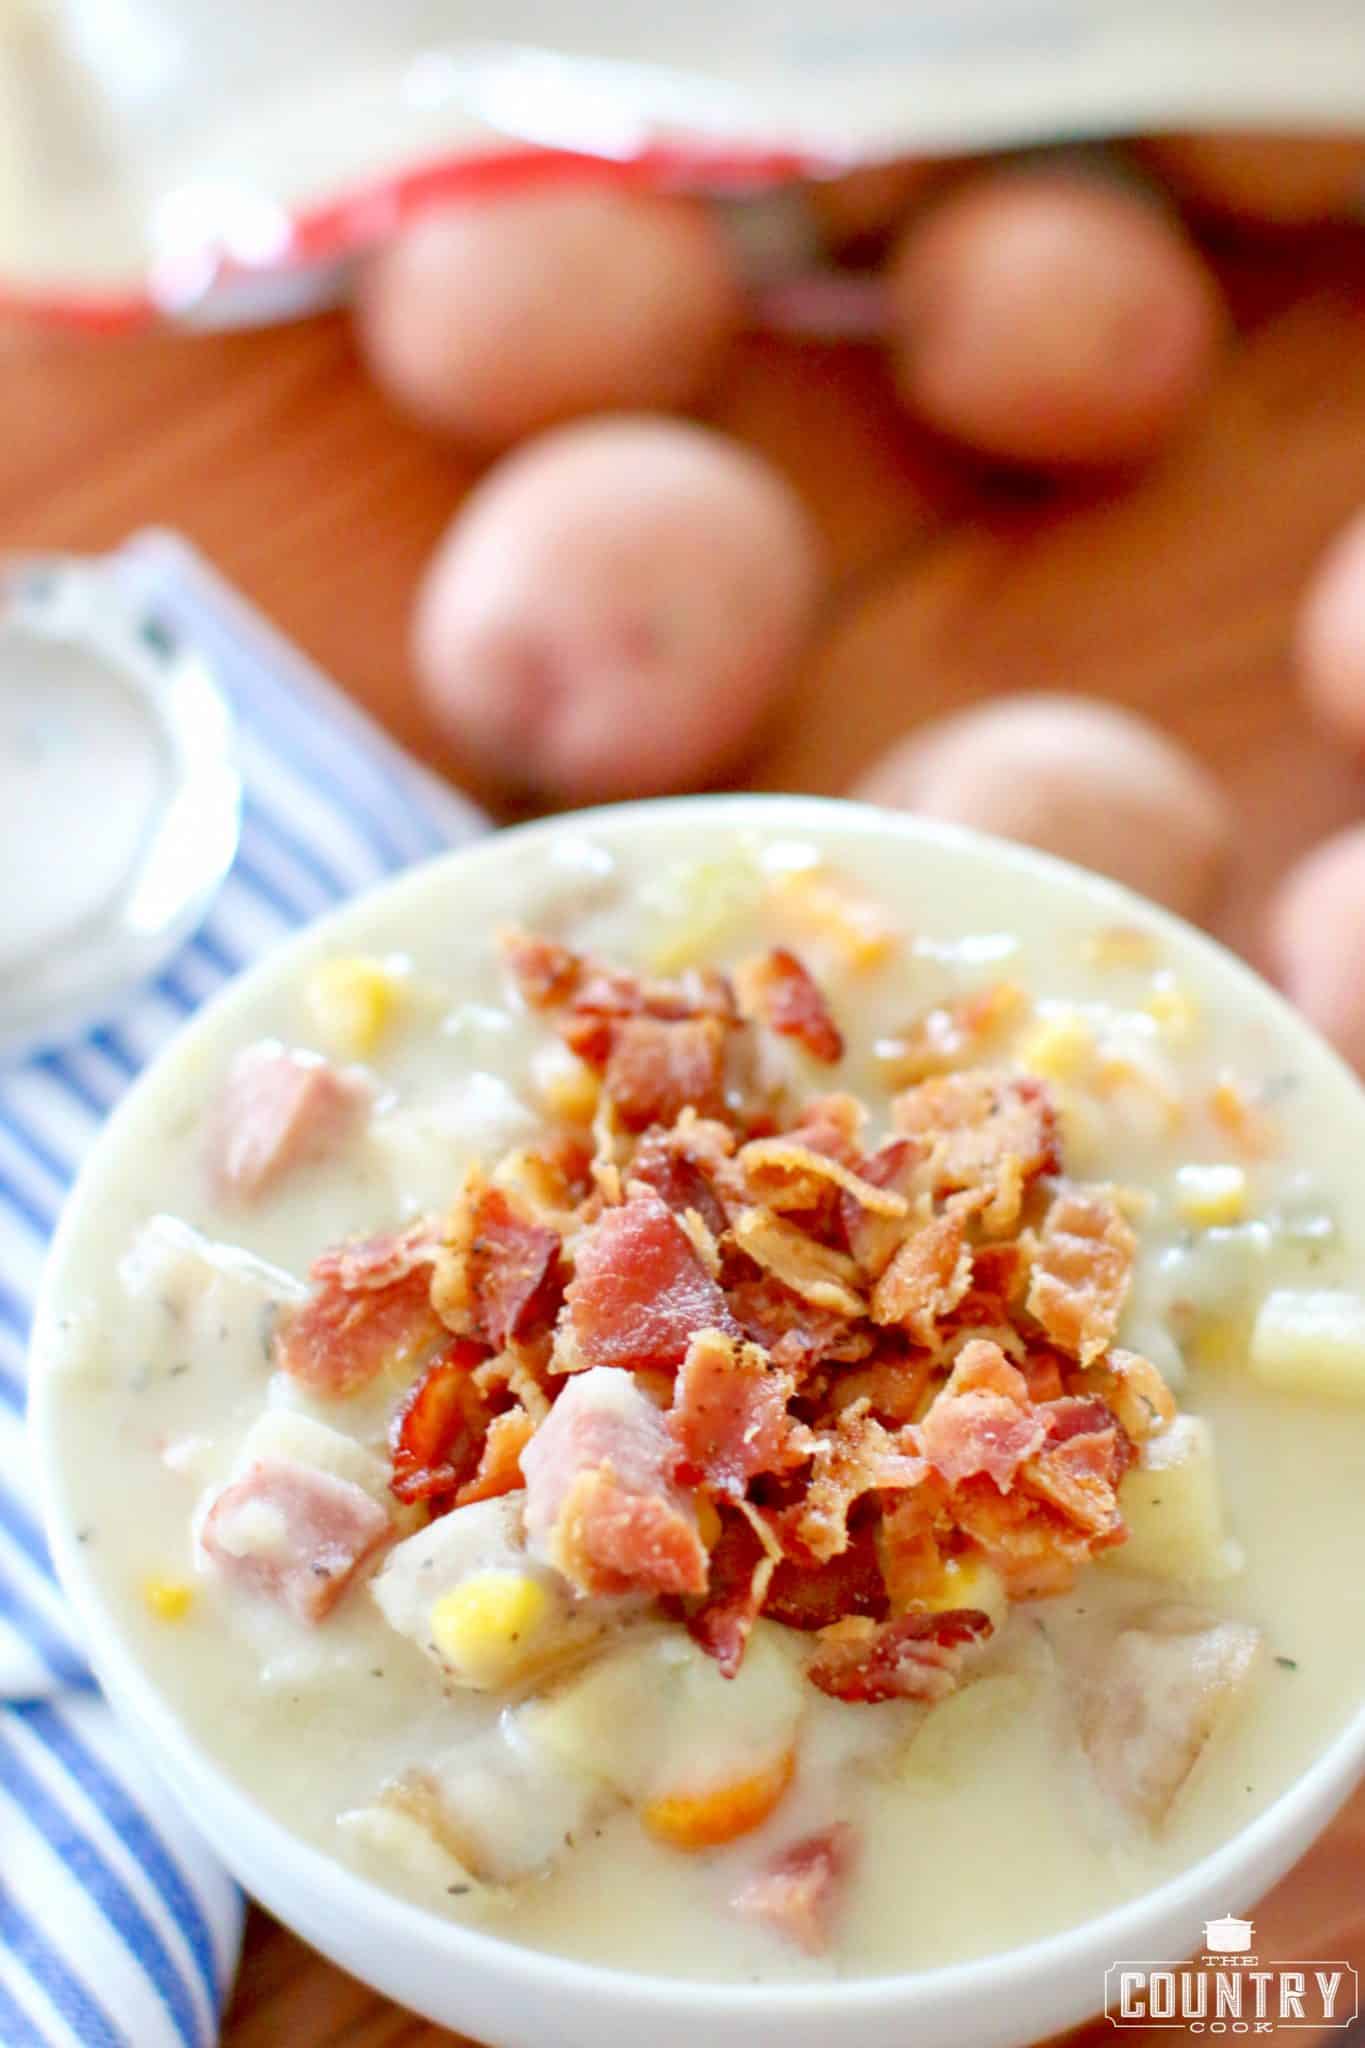 Crumbled bacon on ham, potato and corn chowder in a bowl.